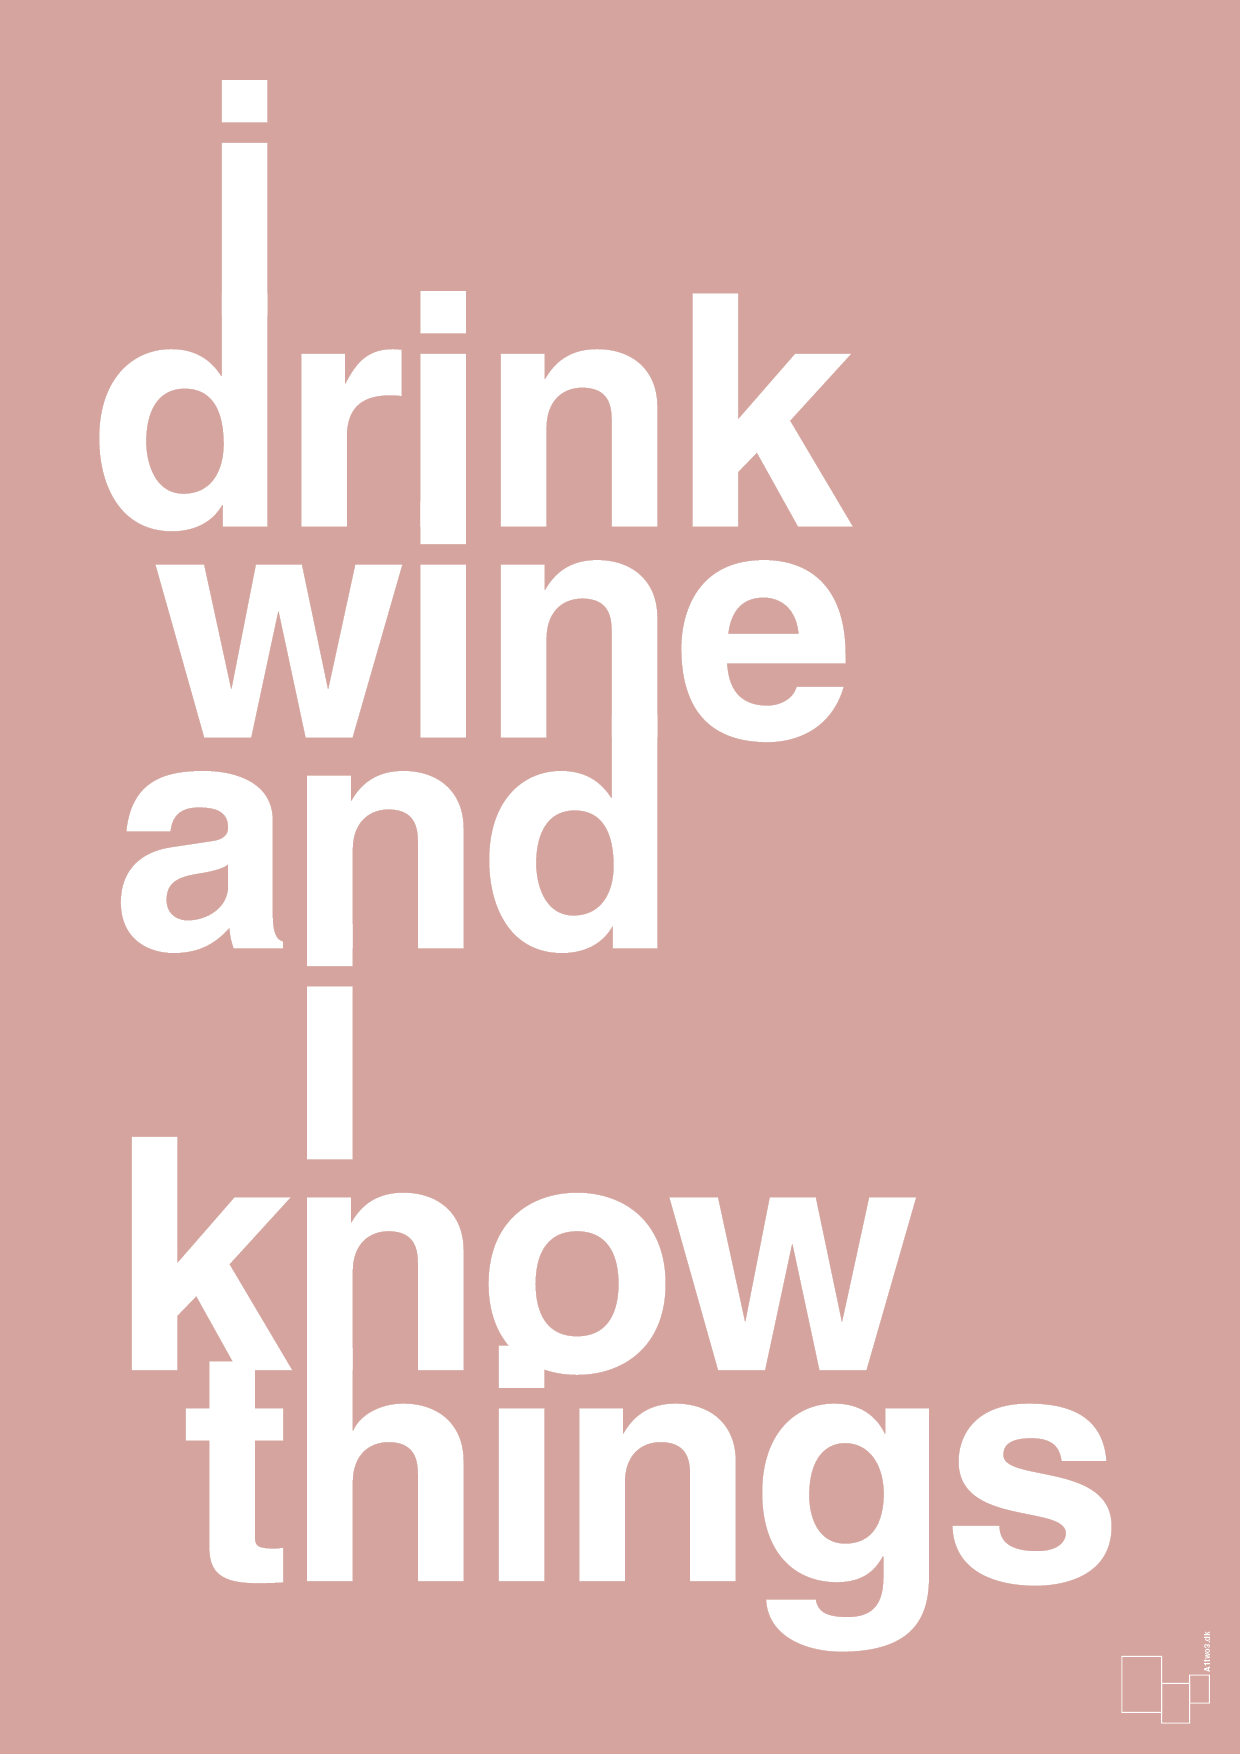 i drink wine and i know things - Plakat med Ordsprog i Bubble Shell